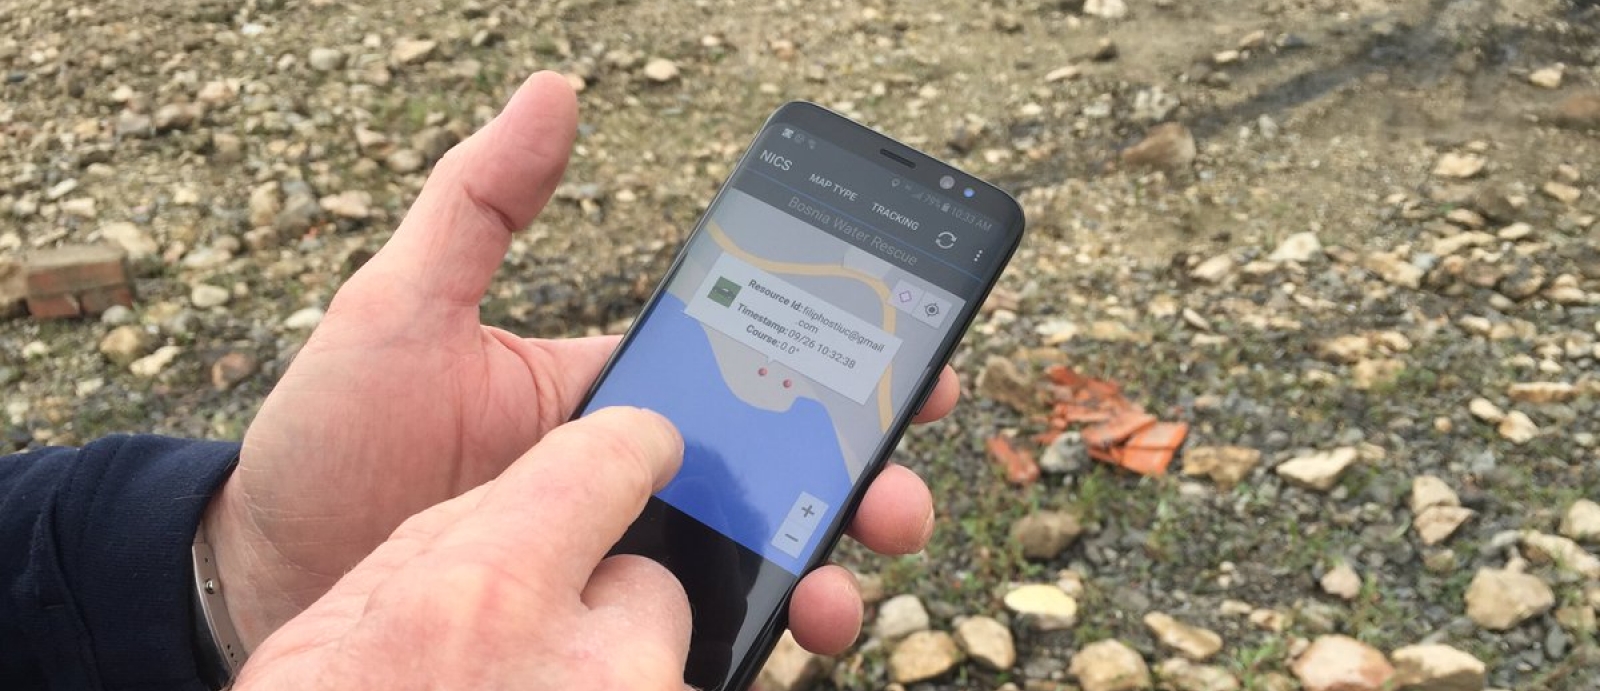 The NICS mobile app allowed users on scene to input real-time information while also monitoring information from commanders or other responders. Photo courtesy of DHS S&T